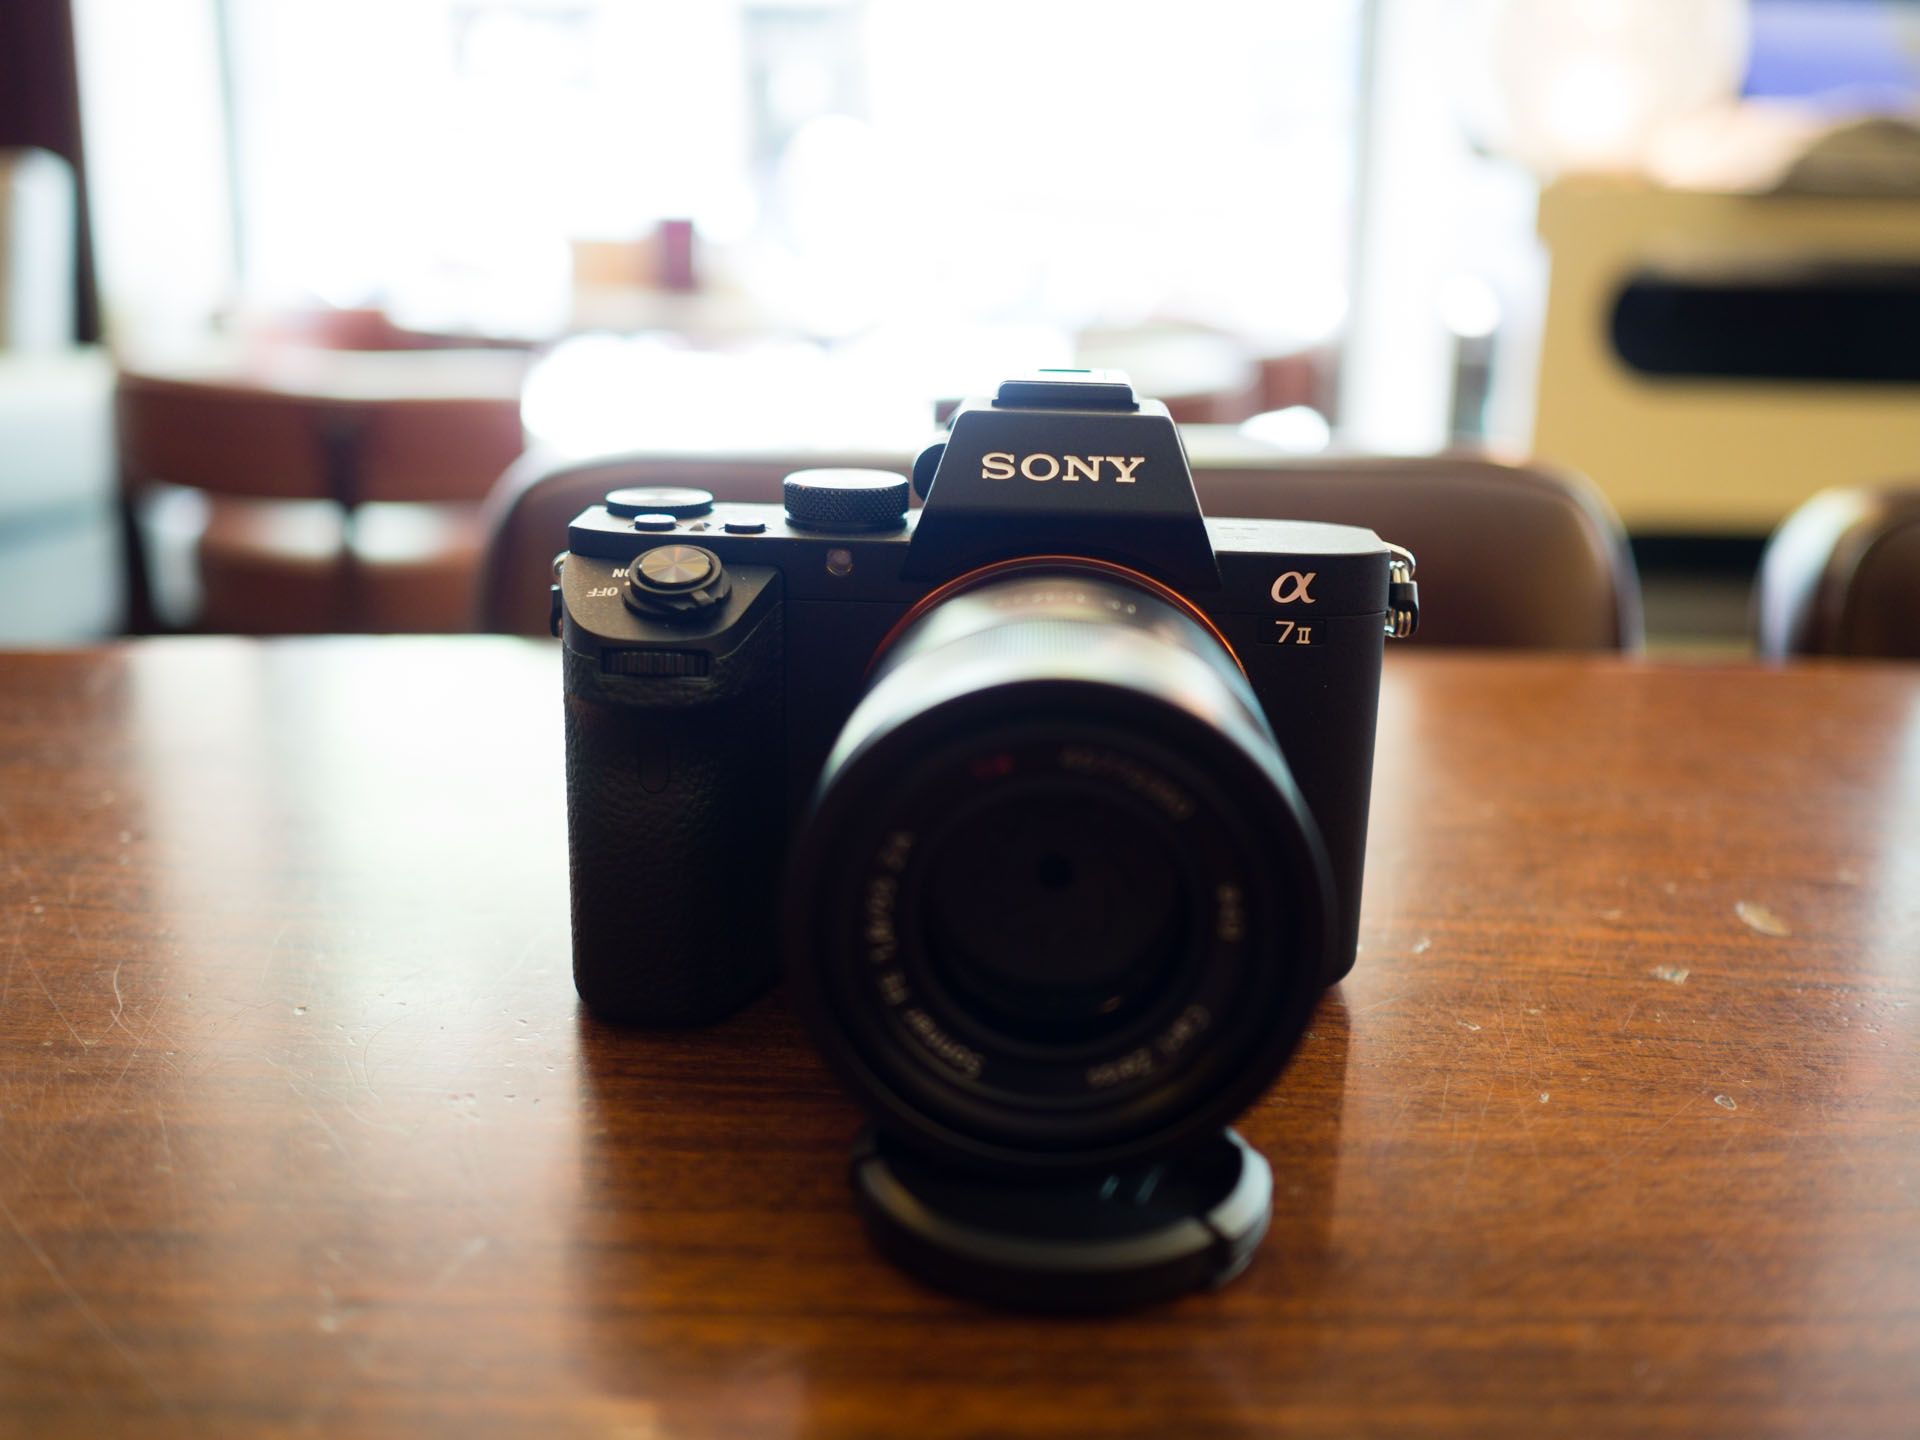 The Sony Alpha α7 Mark II Camera Review